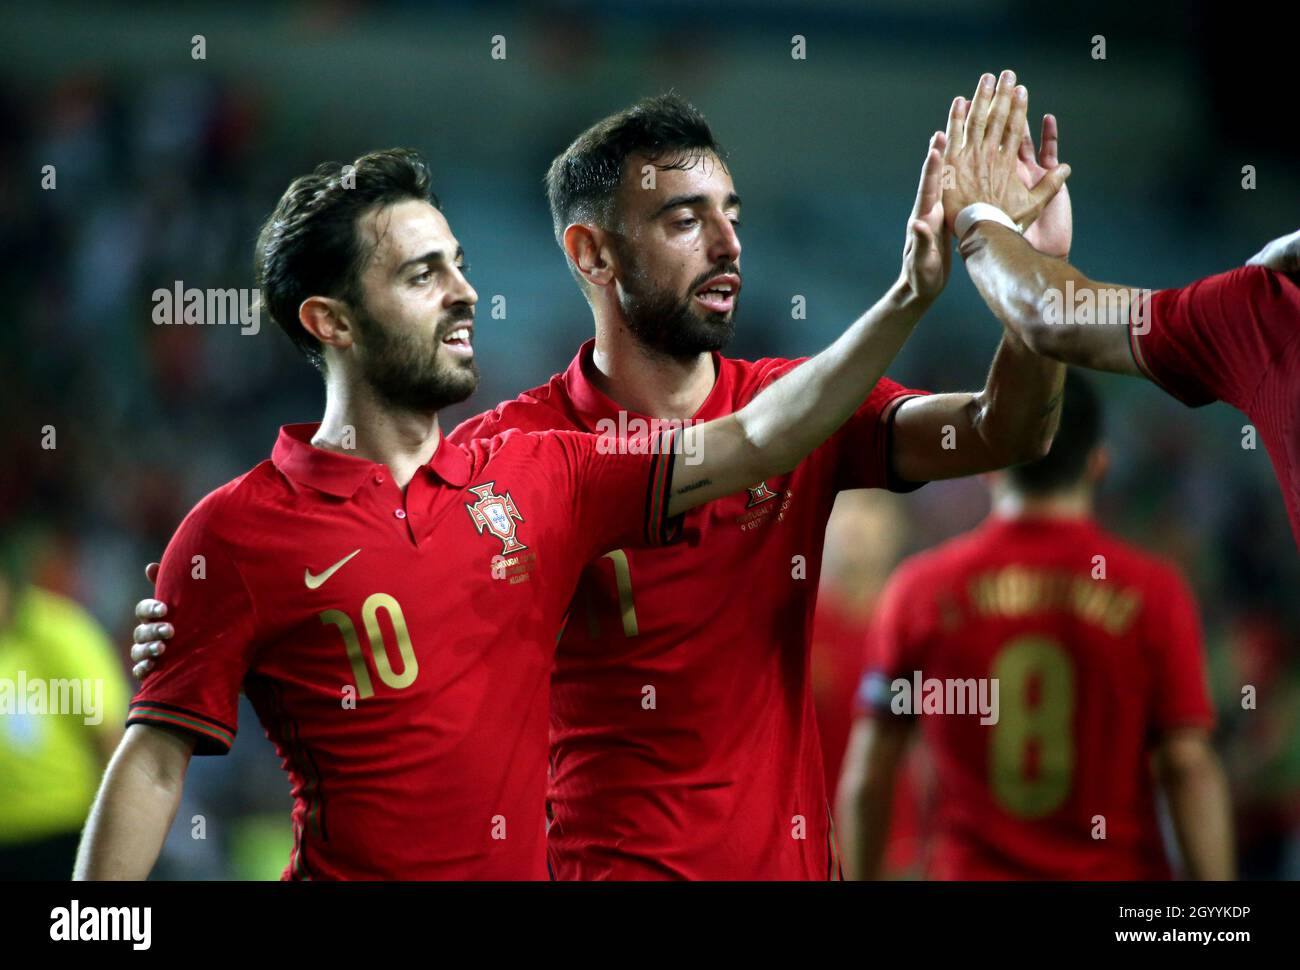 FARO, PORTUGAL - OCTOBER 09: Bernardo Silva and Bruno Fernandes of Portugal celebrates after Andre Silva of Portugal scores is Goal ,during the international friendly match between Portugal and Qatar at Estadio Algarve on October 9, 2021 in Faro, Faro. (Photo by MB Media) Stock Photo